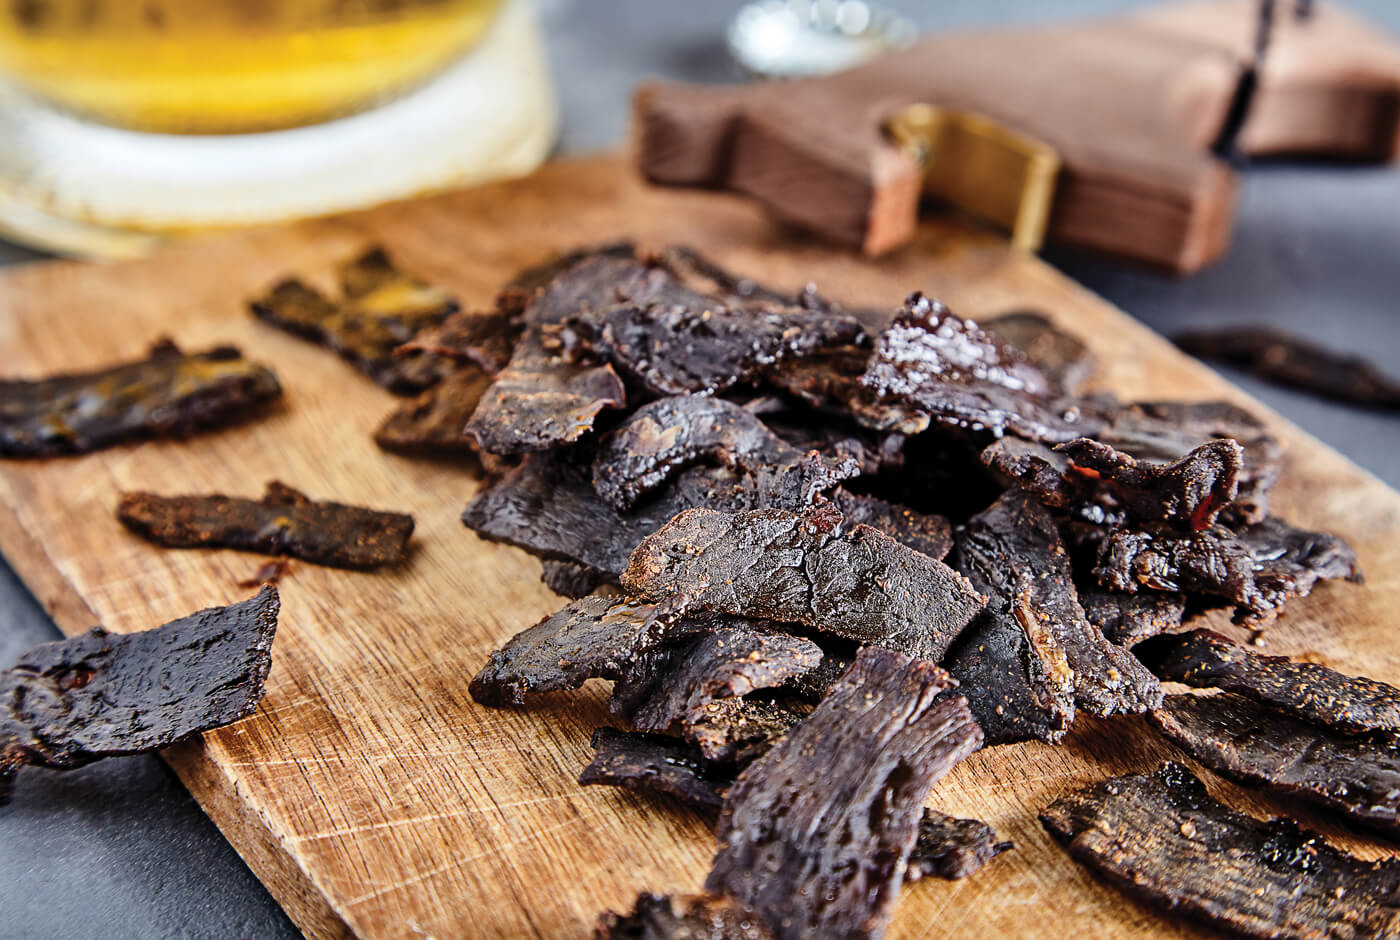 Darker brown strips of jerky arranged in a pile on a wooden cutting board.